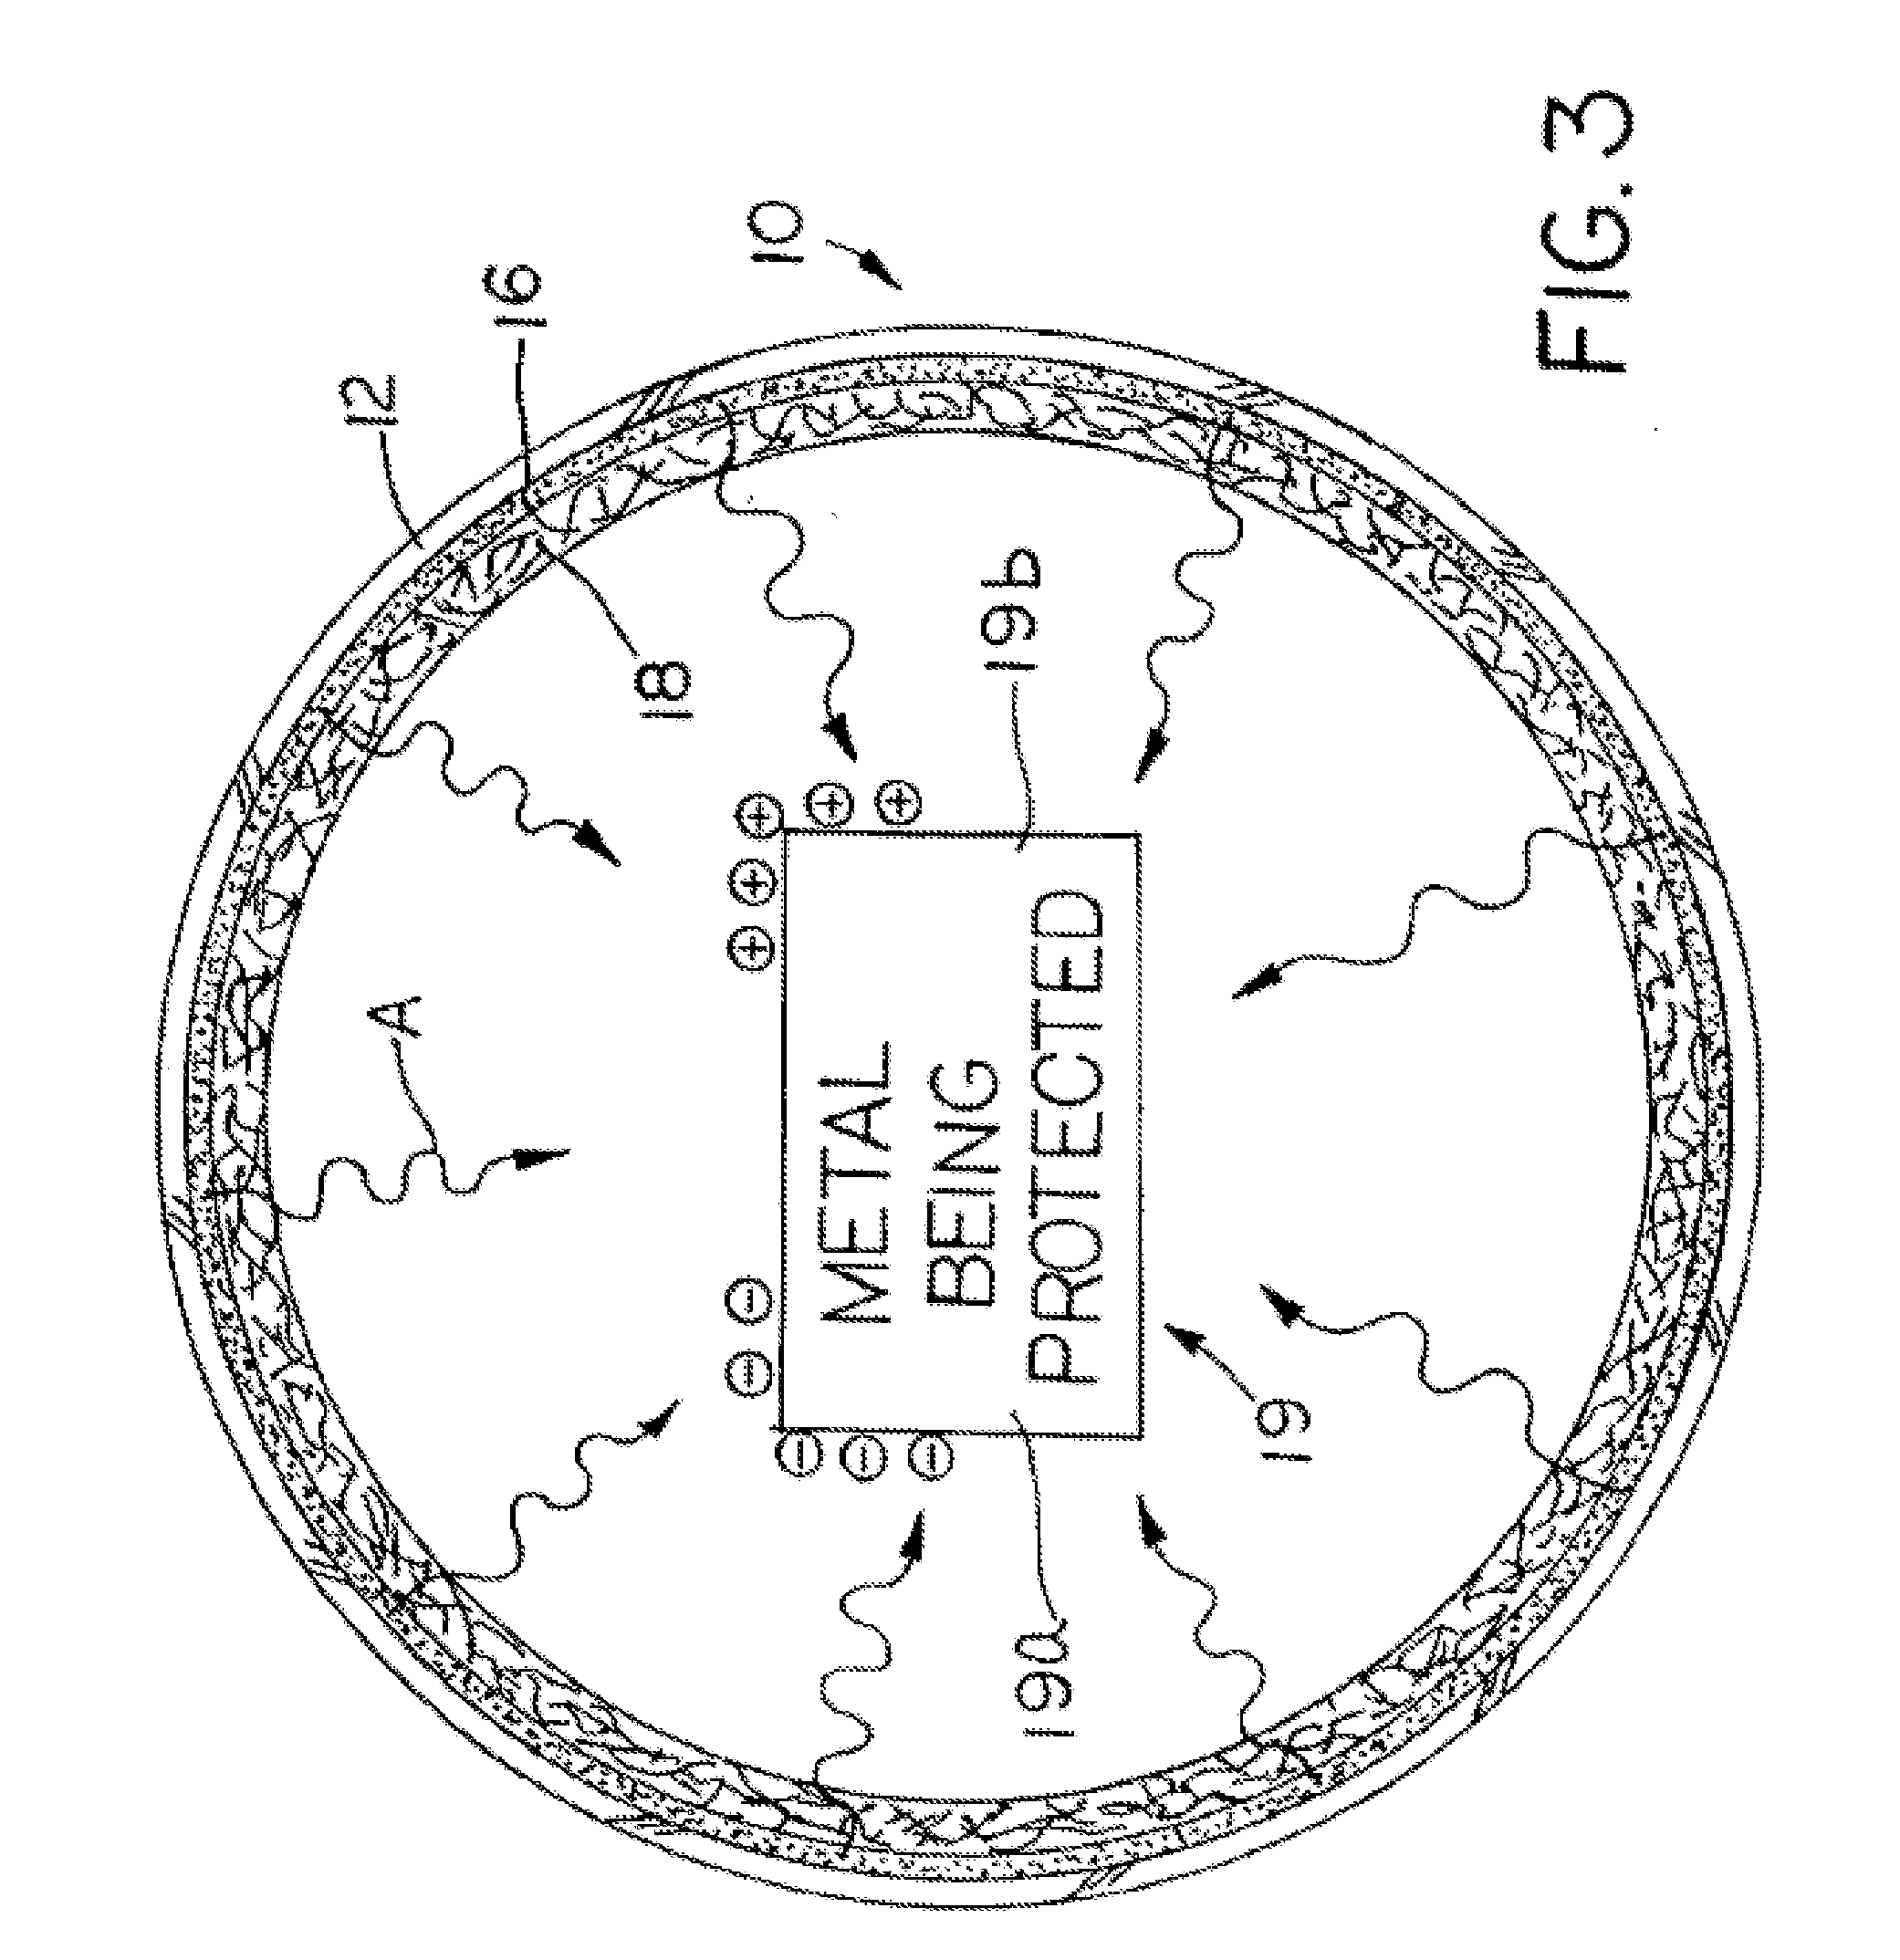 Adhesive composition and method